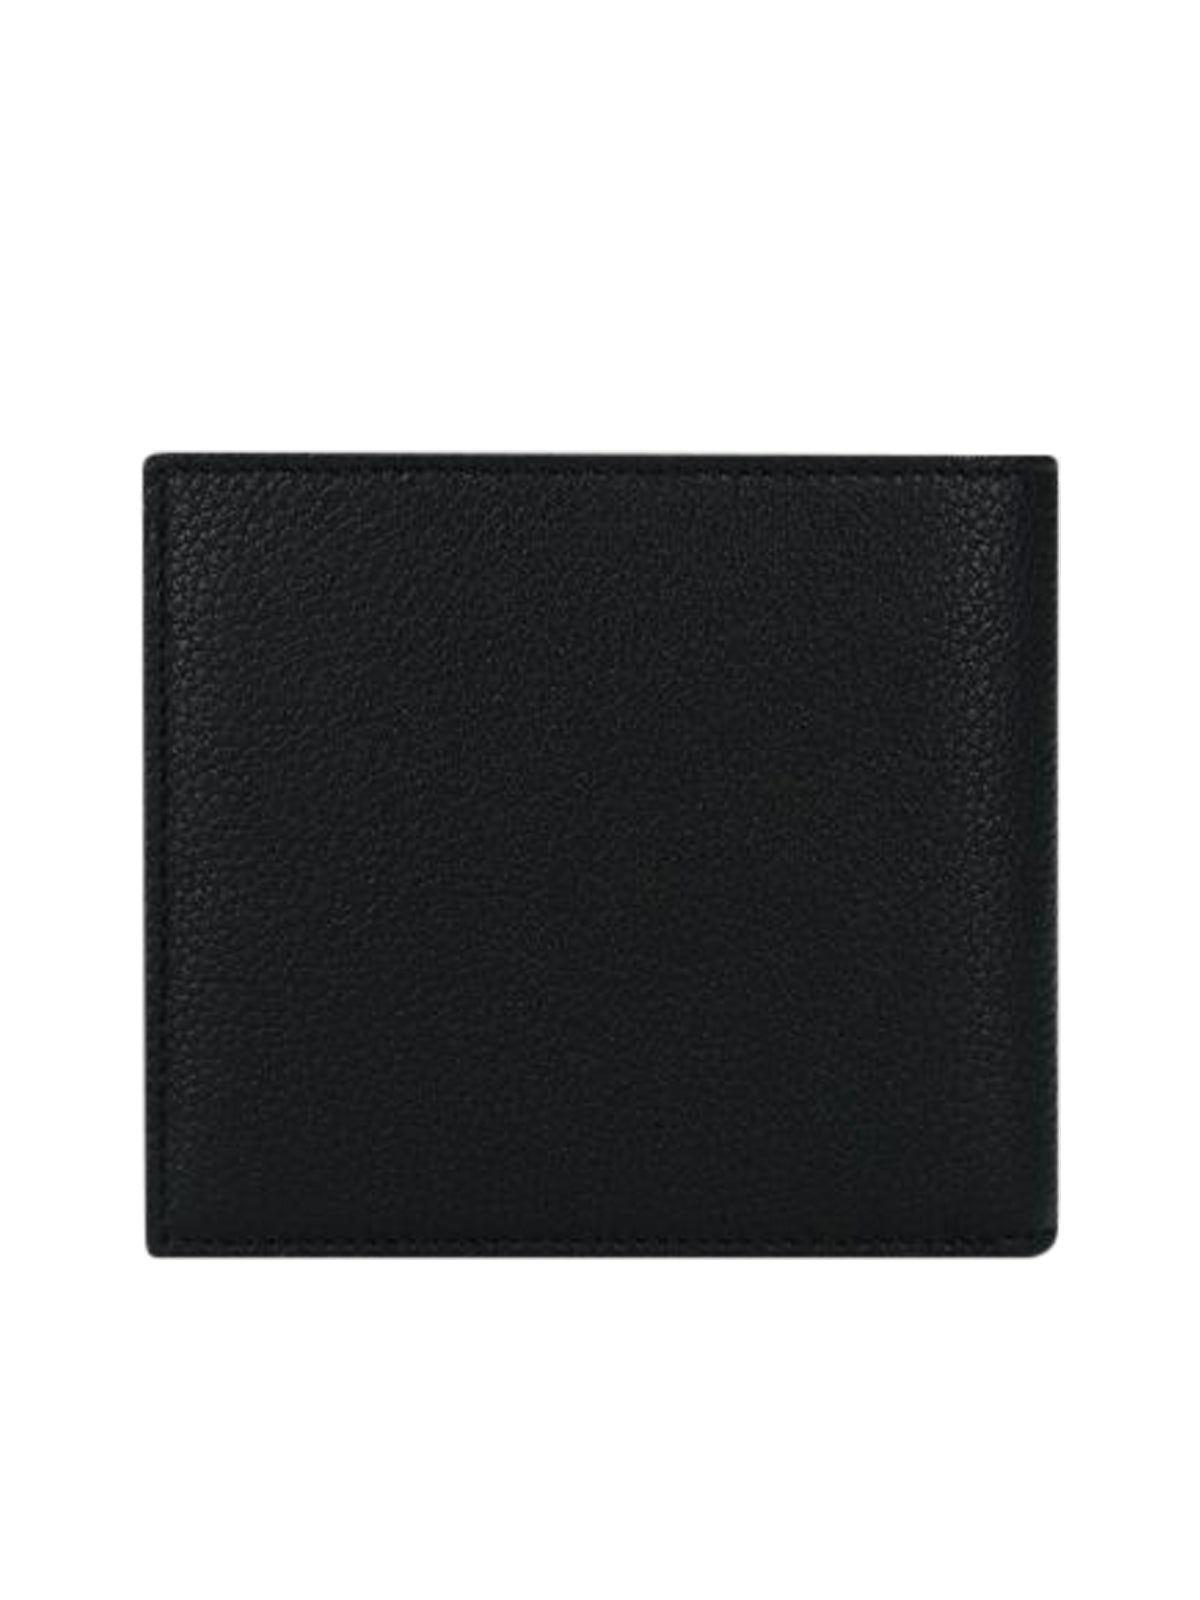 TUMBLED LEATHER BILLFOLD WALLET